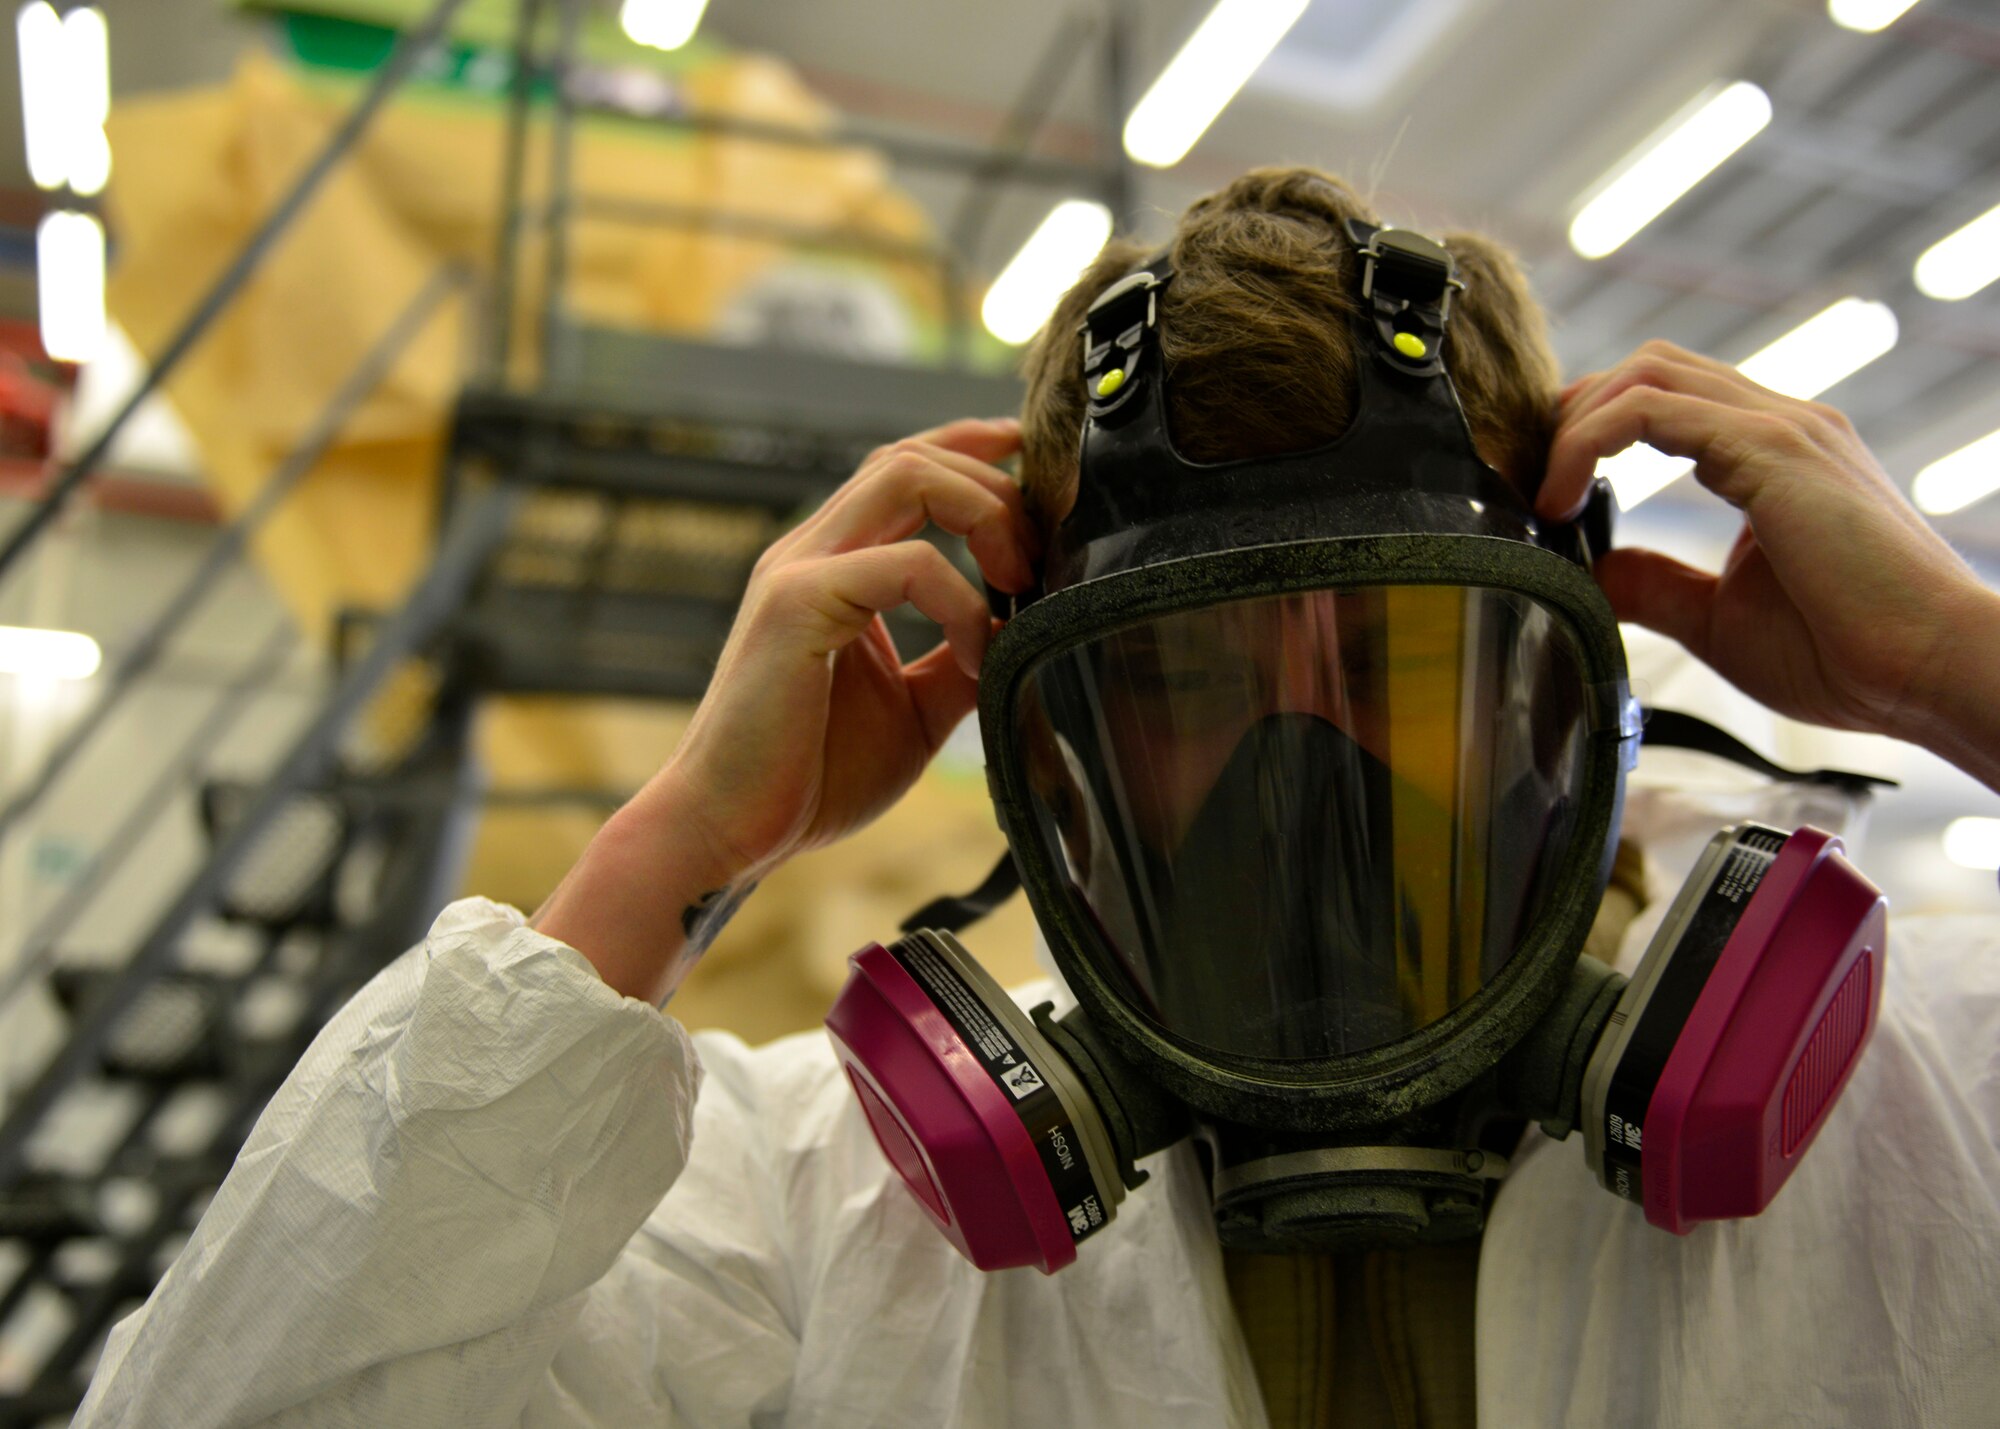 Staff Sgt. Stephen Ramsbacher, 31st Maintenance Squadron Aircraft Structural Maintenance craftsman, secures his respirator mask before painting at Aviano Air Base, Italy, Jan. 27, 2017. Ramsbacher helped prepare and repaint an F-16 Fighting Falcon tail. (U.S. Air Force photo by Senior Airman Cary Smith) 